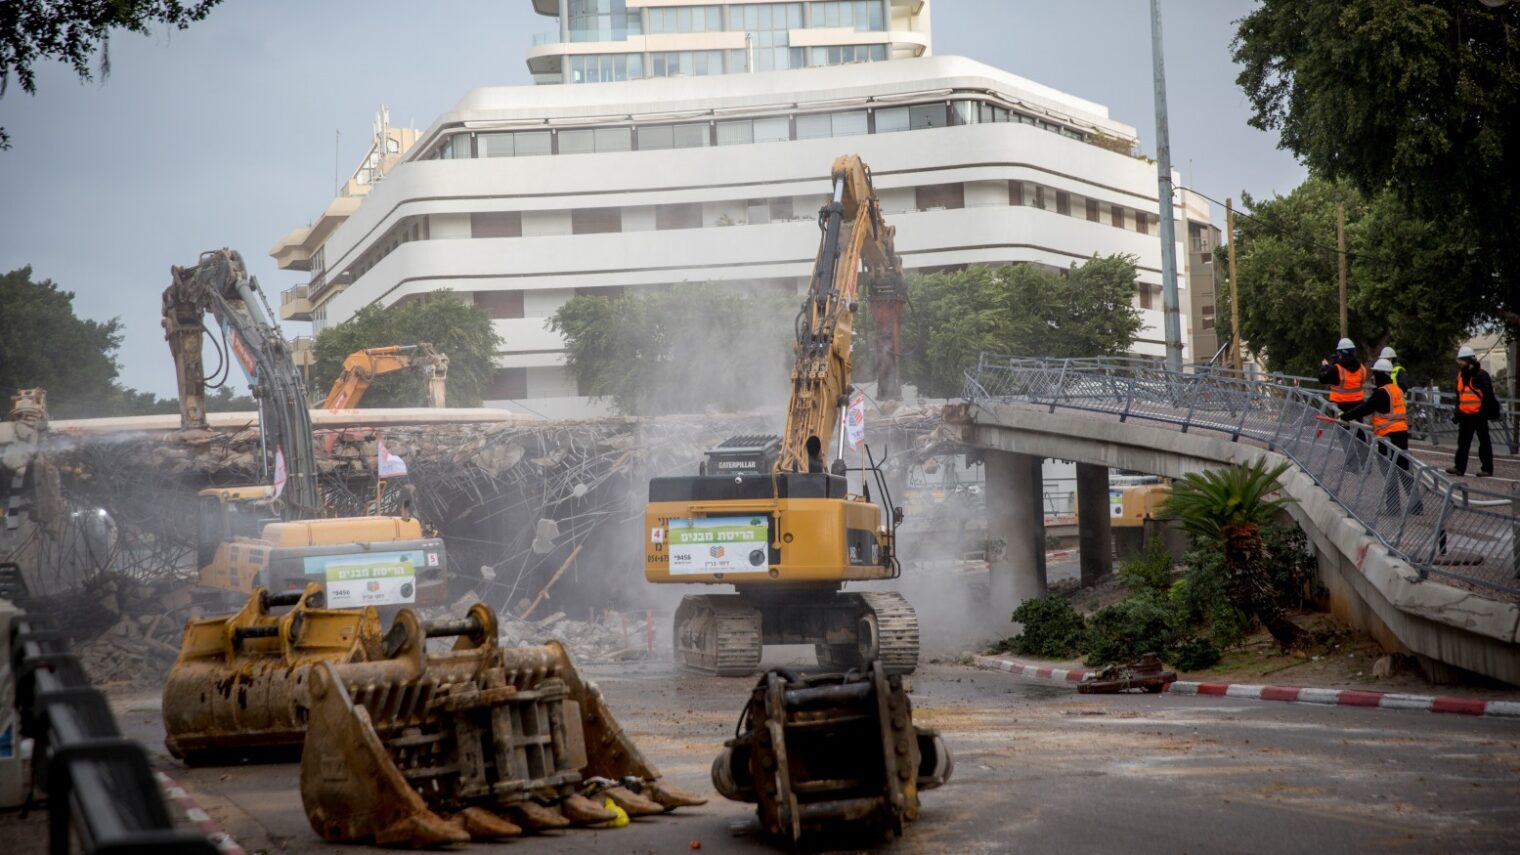 Construction in Dizengoff Square is expected to take a year. Photo by Miriam Alster/FLASH90